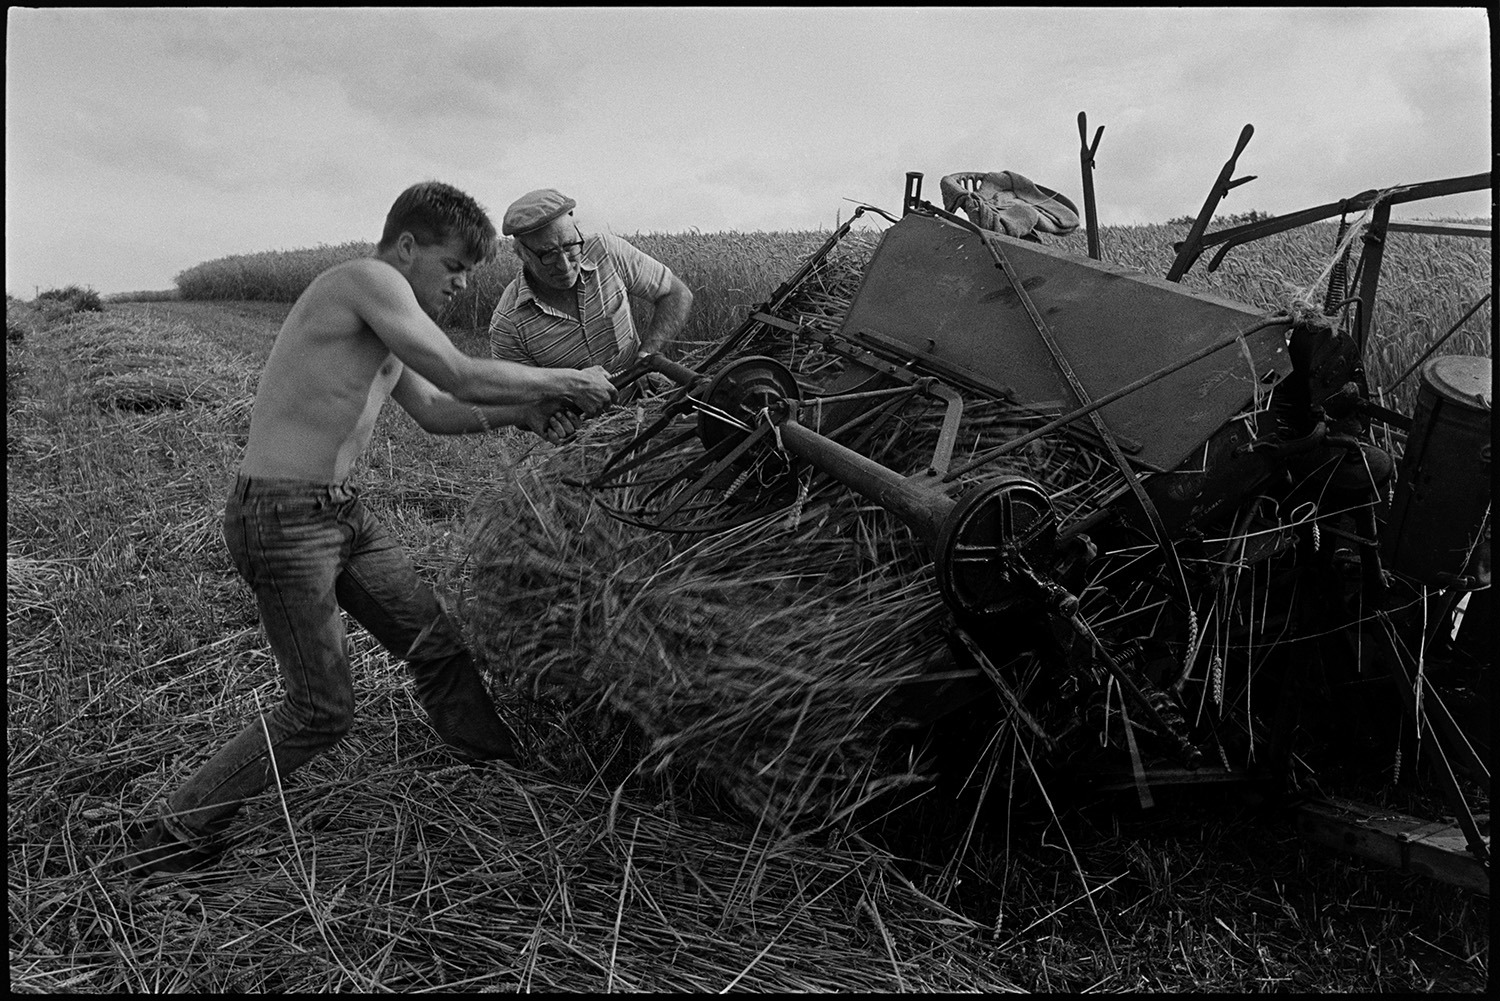 Farmers setting up stooks and unblocking reap and binder which had jammed. 
[A young man and older man, possibly from the Down family, unblocking stuck reed from a reap and binder, in a field at Spittle Farm, Chulmleigh.]